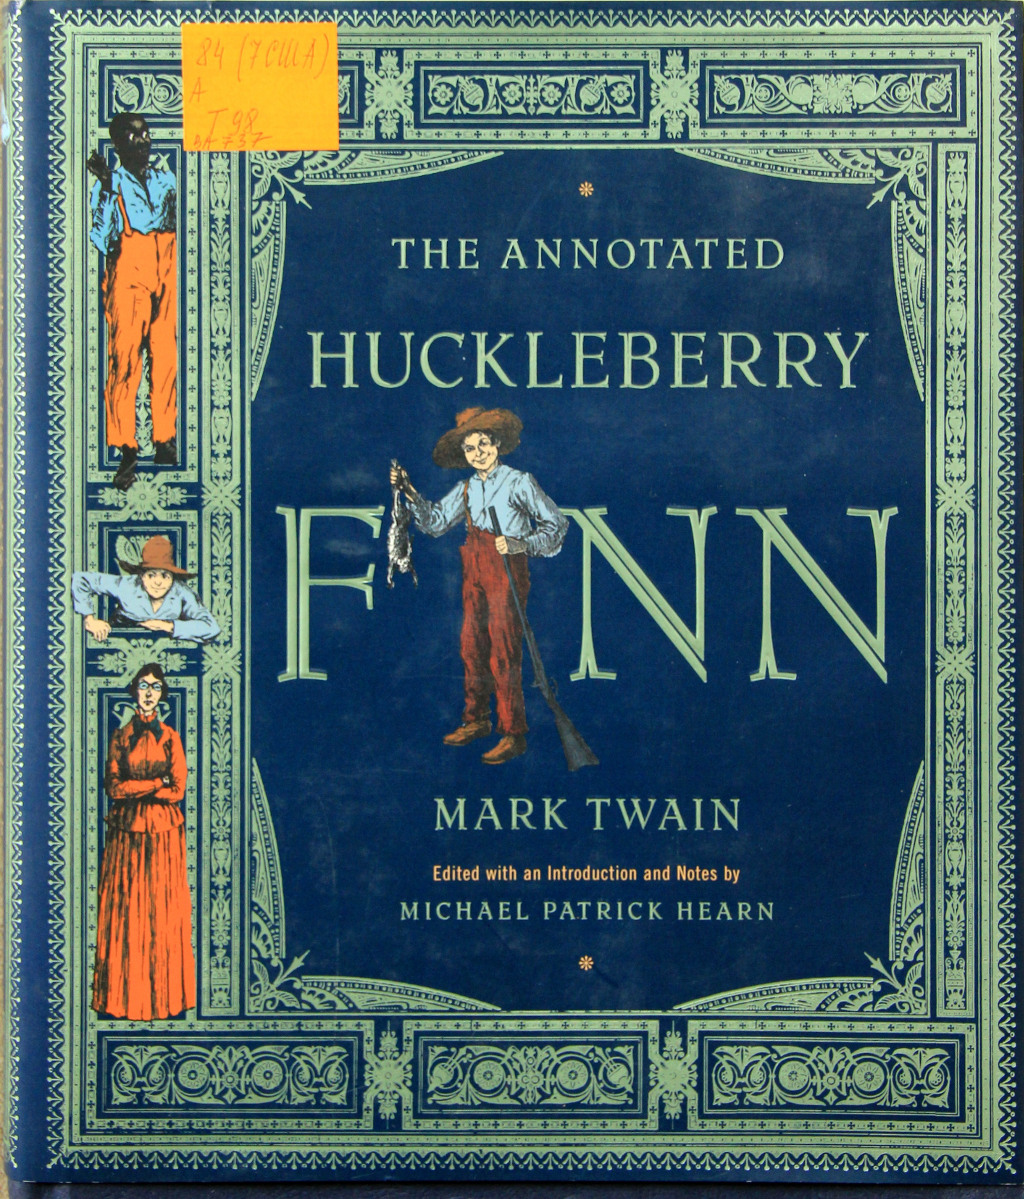 The adventures of Huckleberry Fin: text and criticism